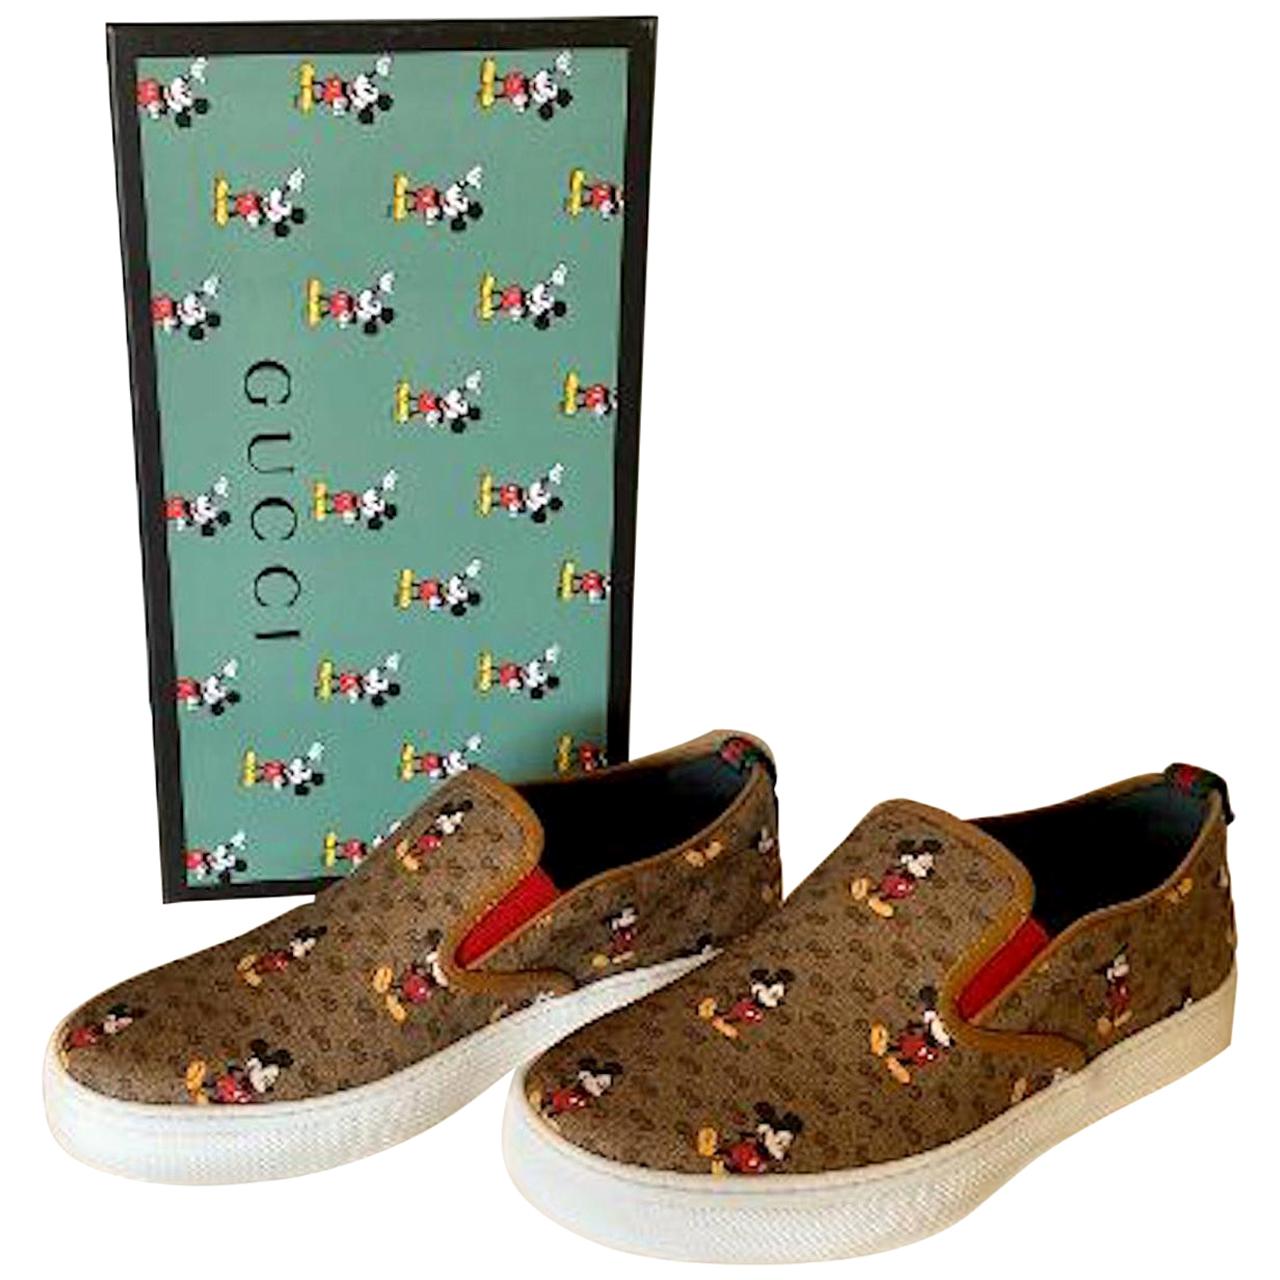 SOLD OUT Gucci Mickey Mouse Men's Size 10.5 Slip-on Sneakers